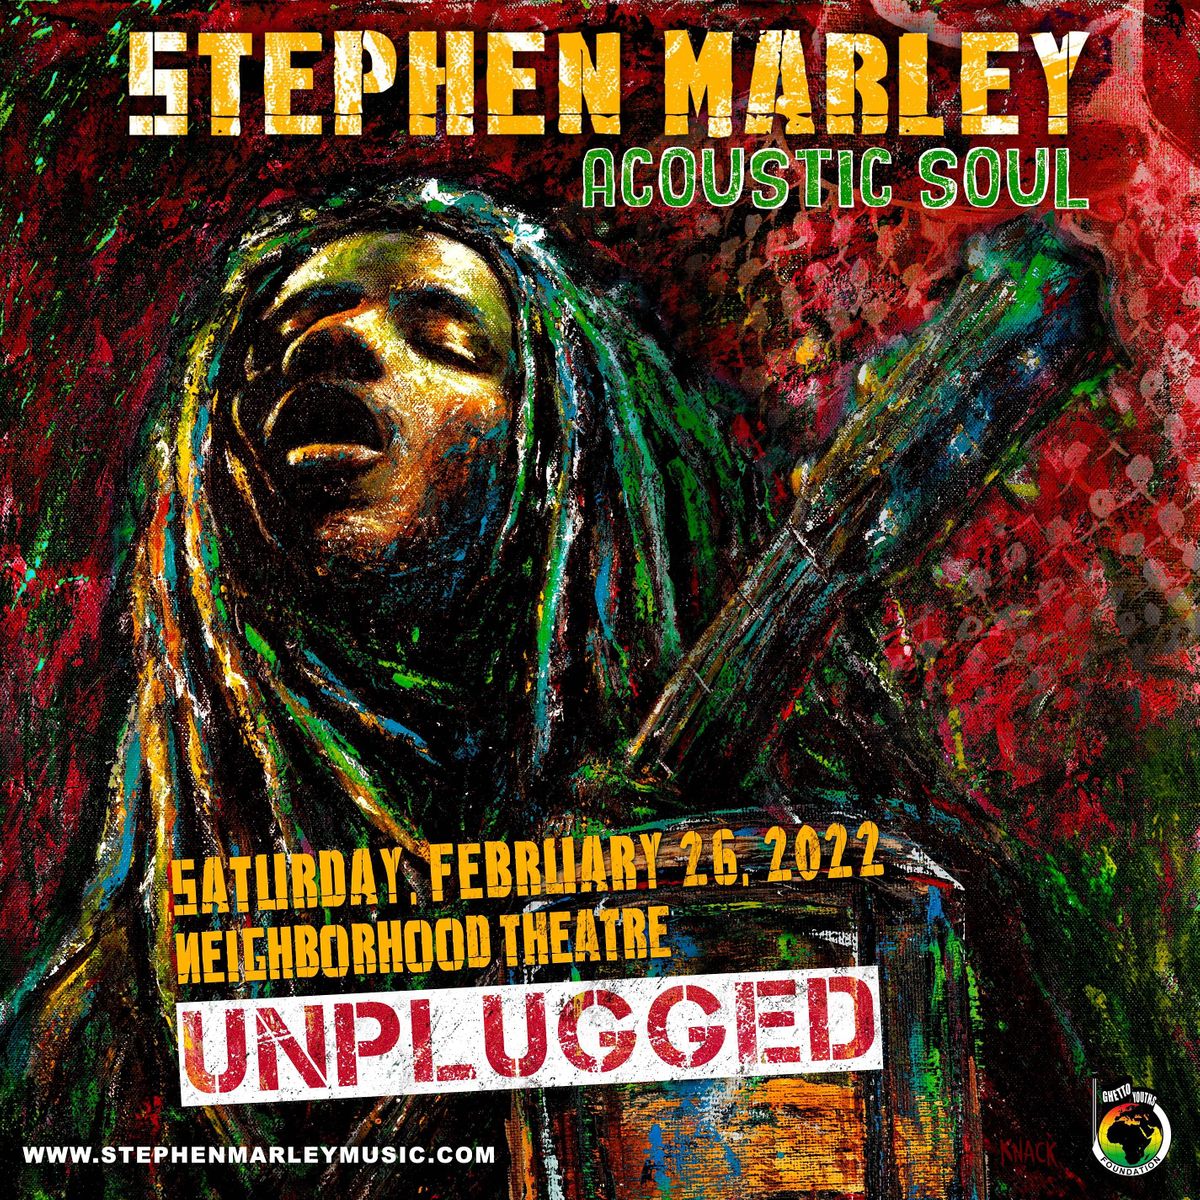 AN EVENING WITH: STEPHEN MARLEY ACOUSTIC SOUL